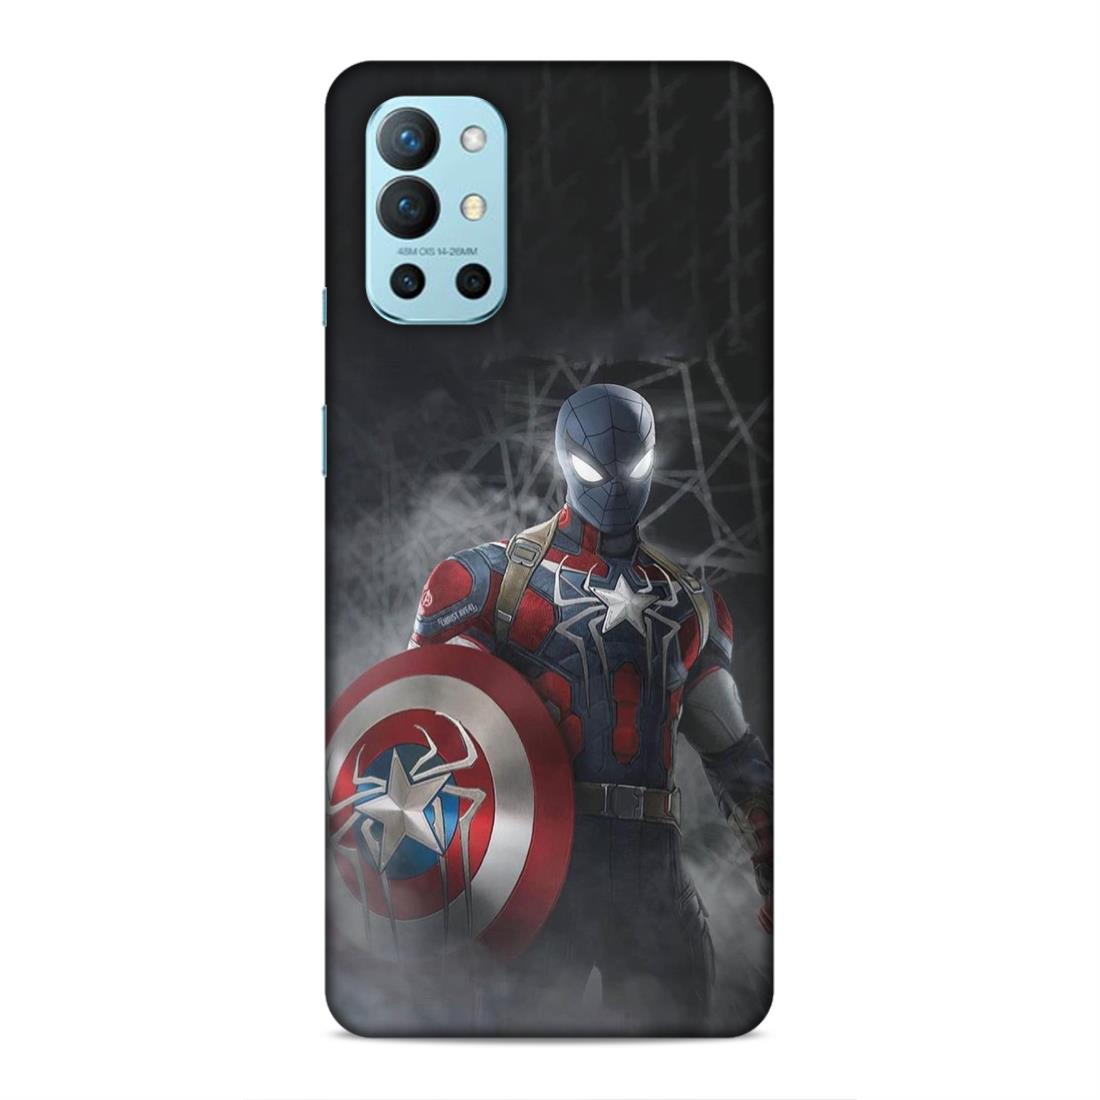 Spiderman With Shild Hard Back Case For OnePlus 8T / 9R